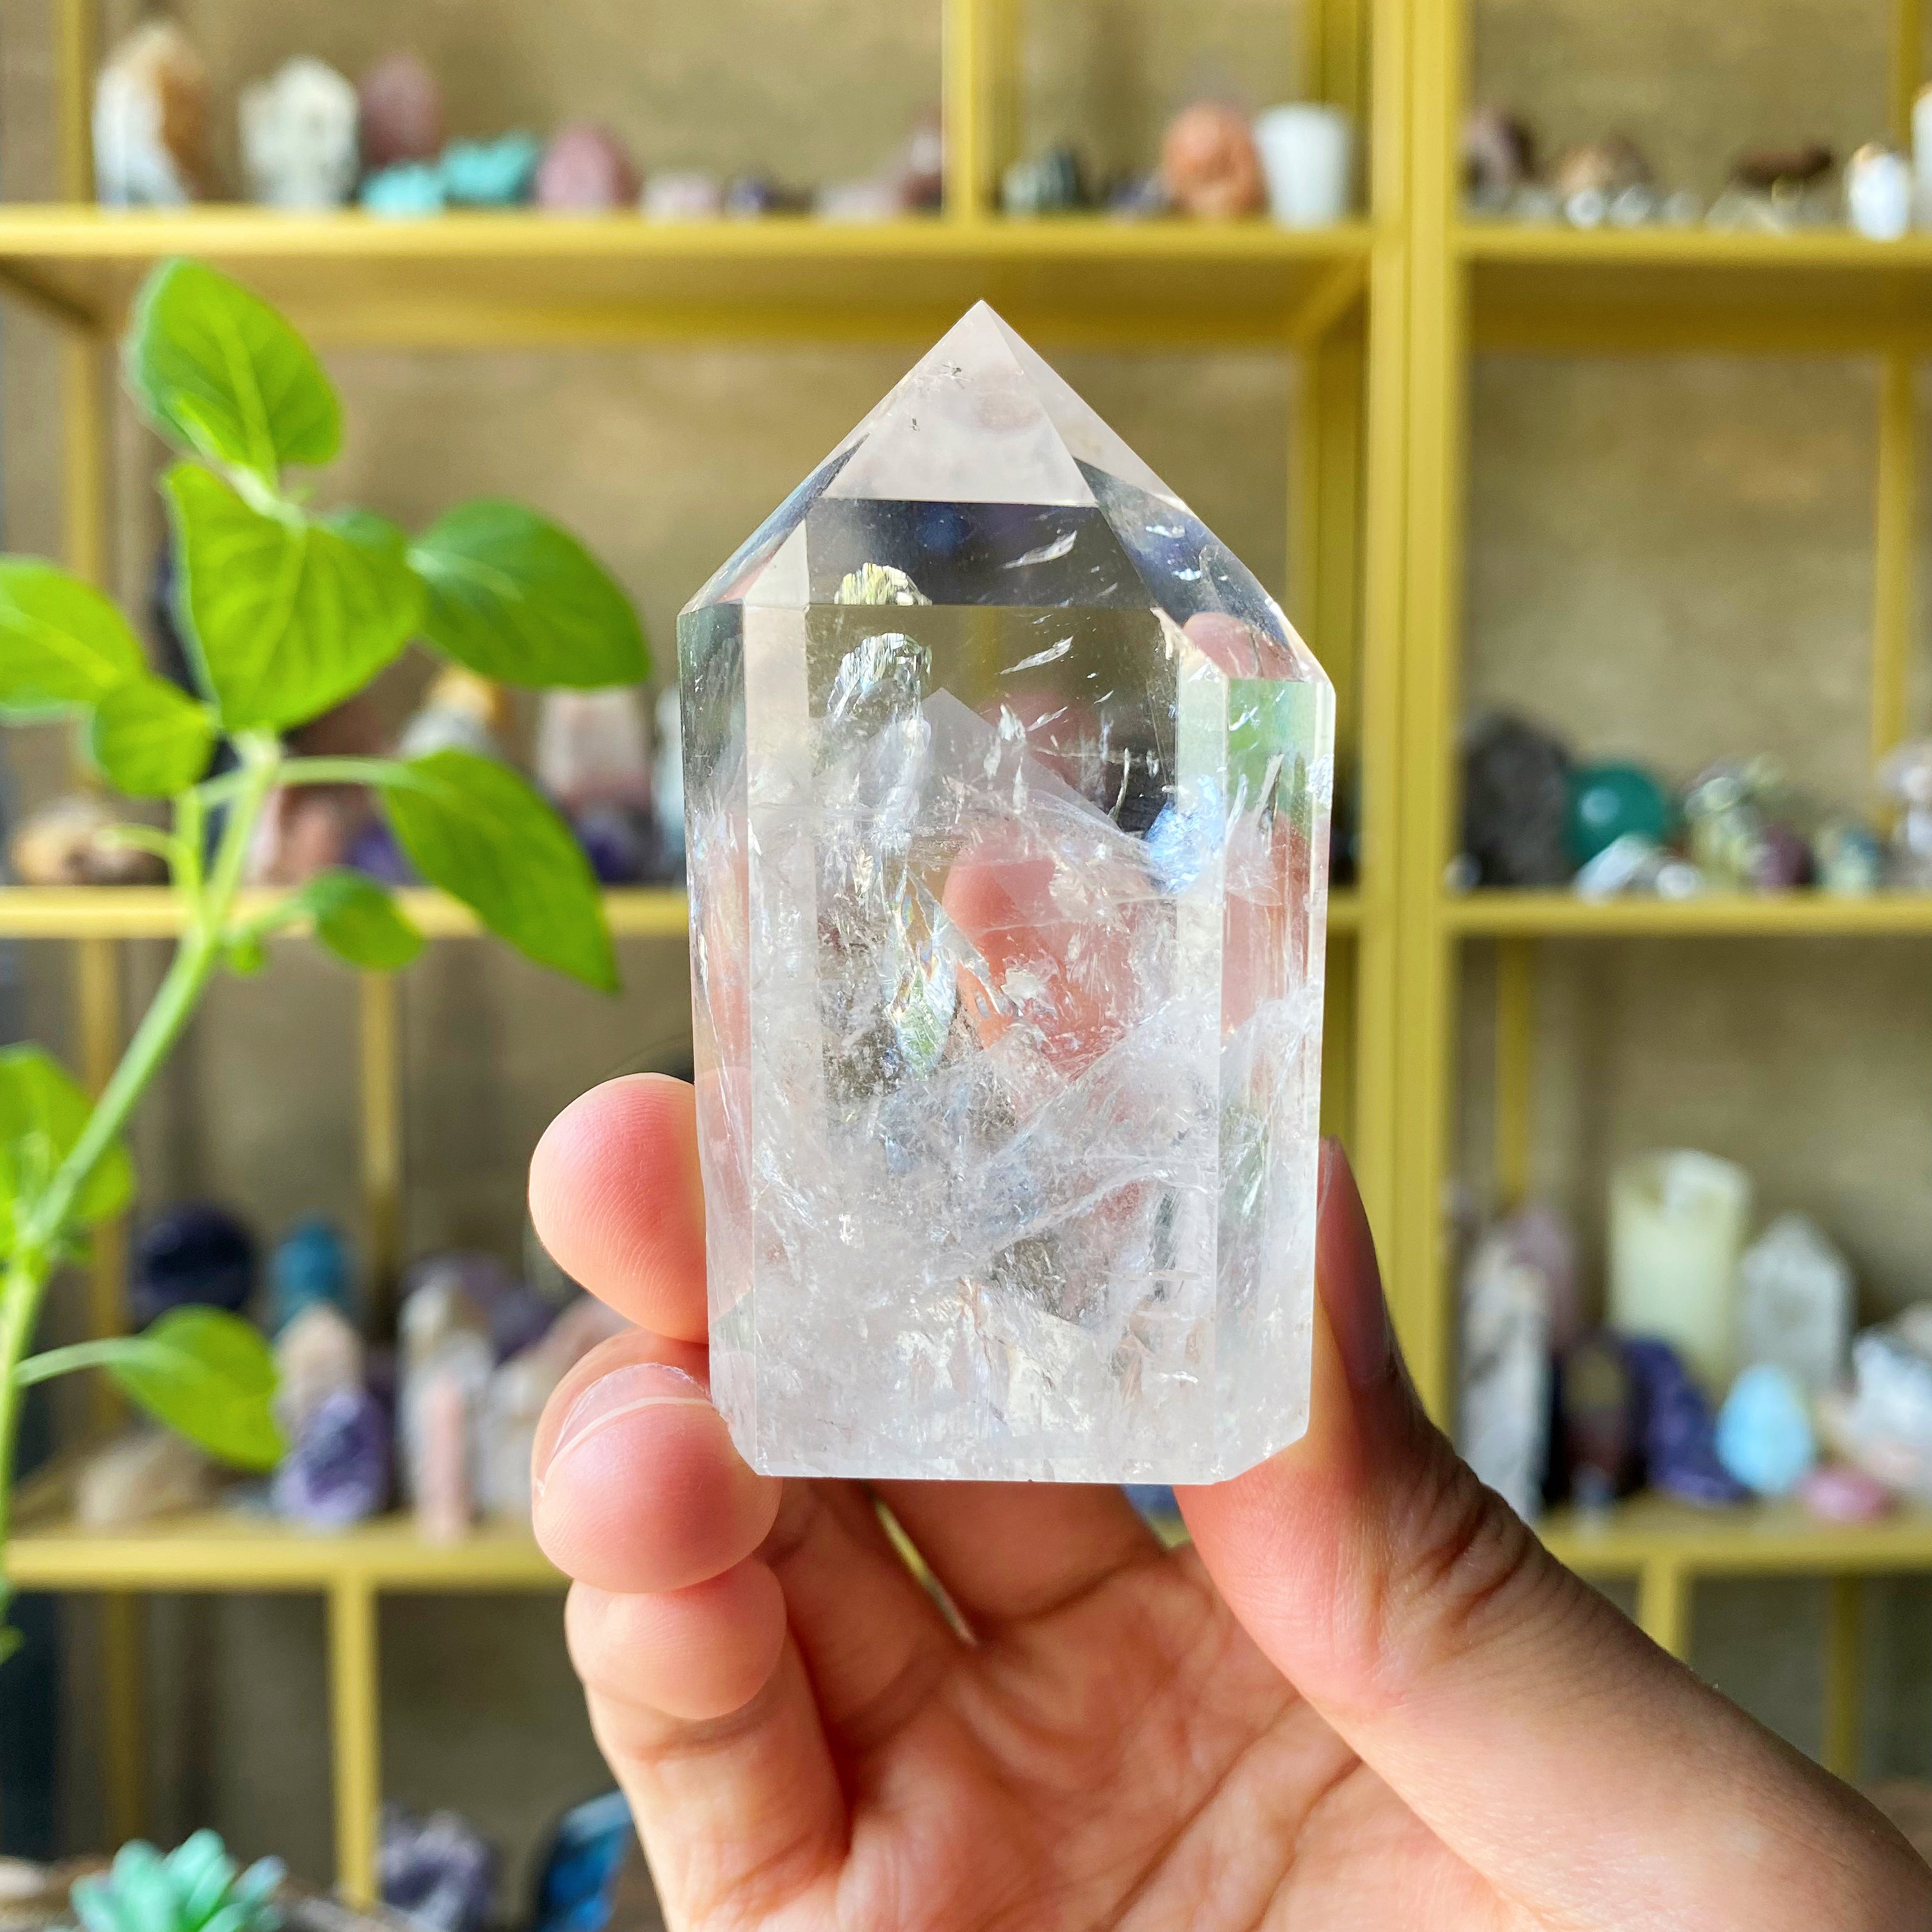 【Weekly Flash Deals】Clear Quartz With Pyramid Point